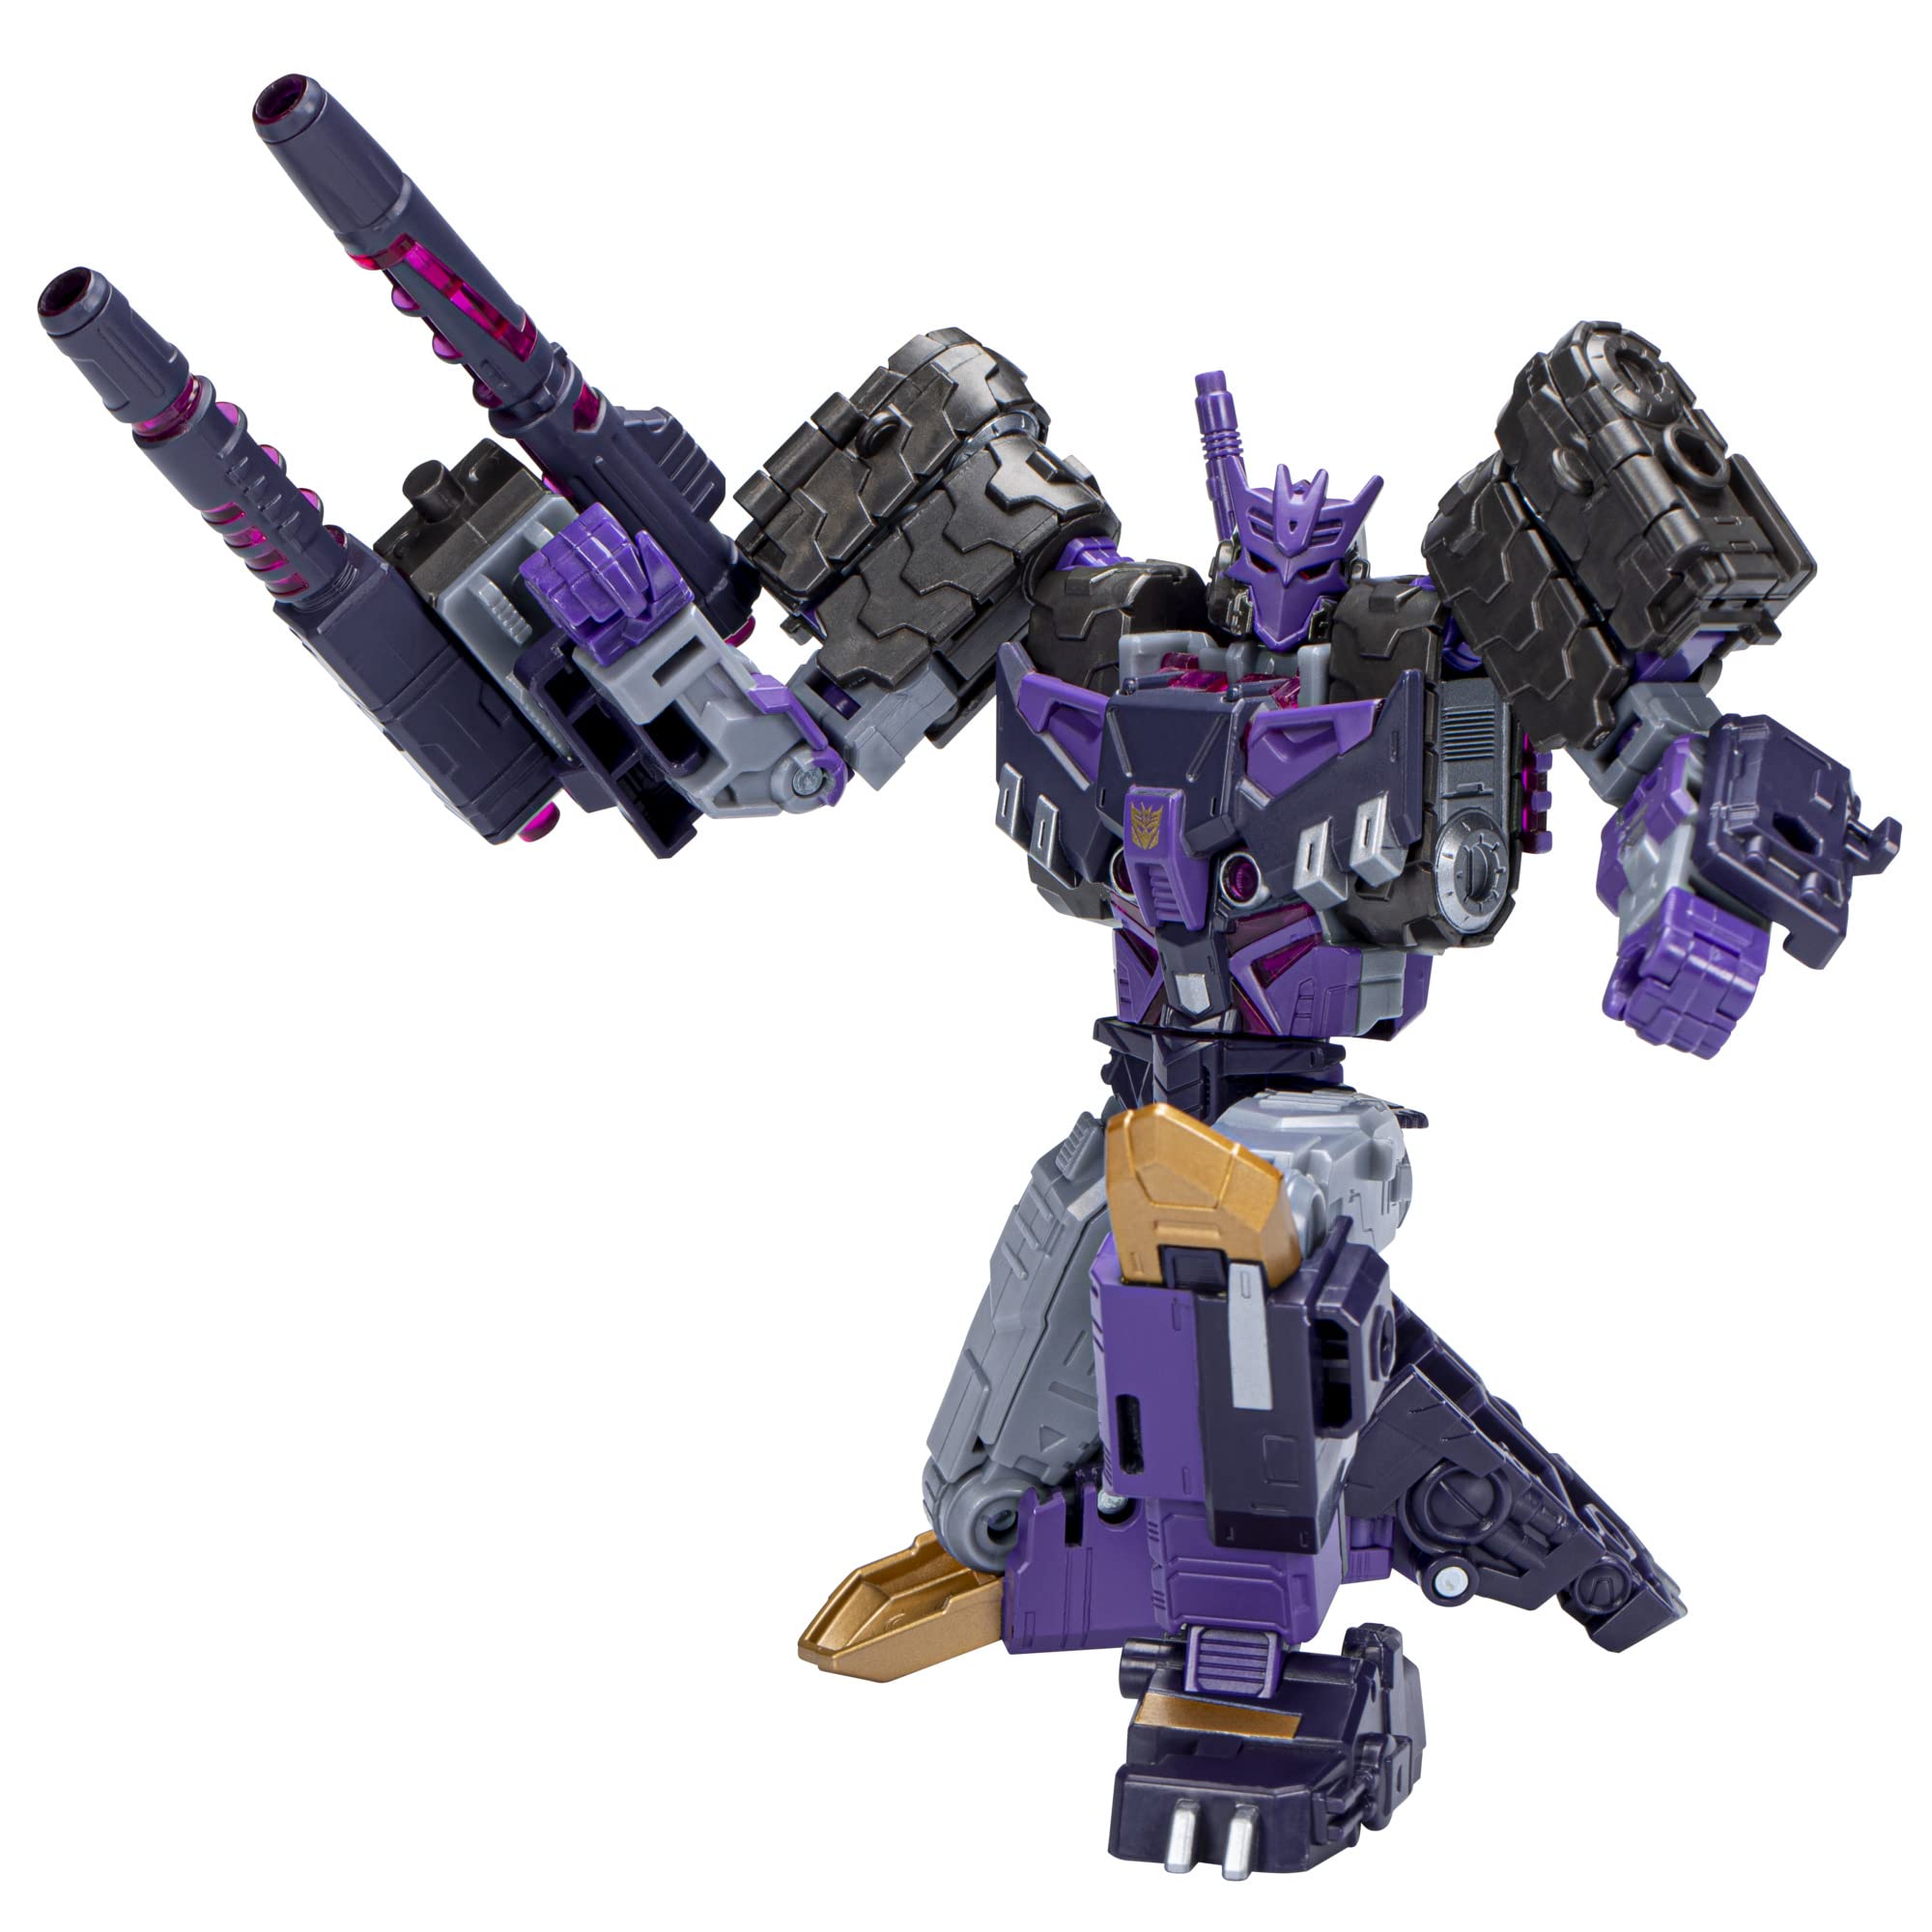 Transformers Toys Legacy Evolution Voyager comic Universe Tarn Toy, 7-inch, Action Figure for Boys and girls Ages 8 and 